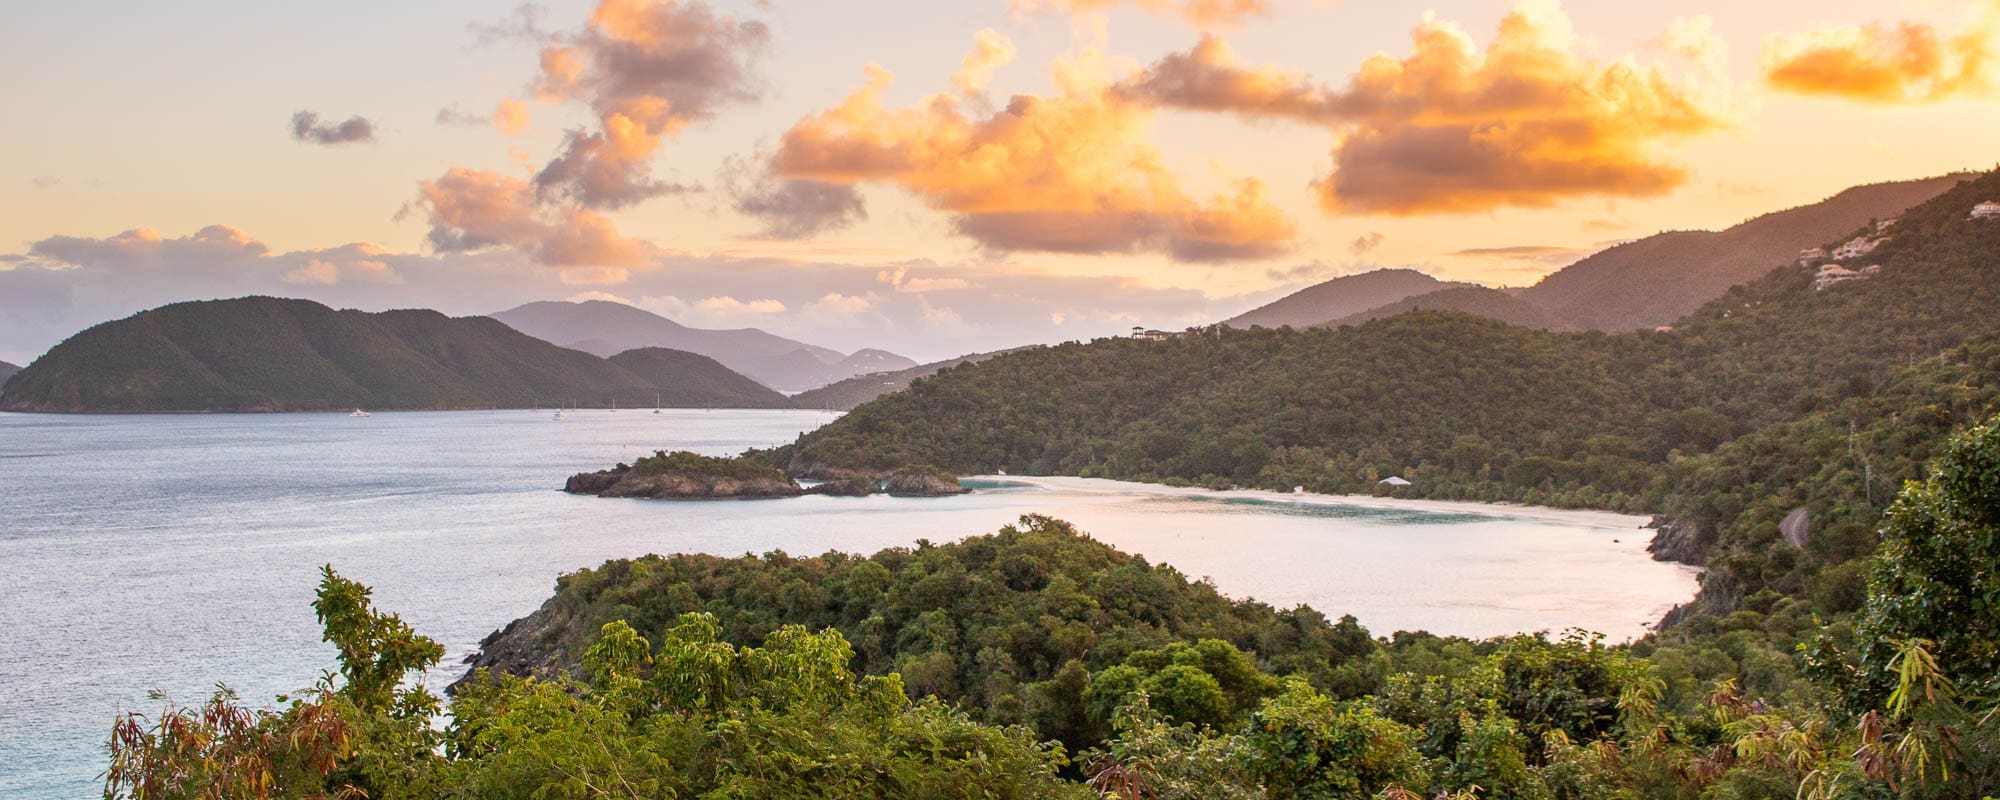 Sunrise view of Trunk Bay and Beach from Peace Hill in Virgin Islands National Park